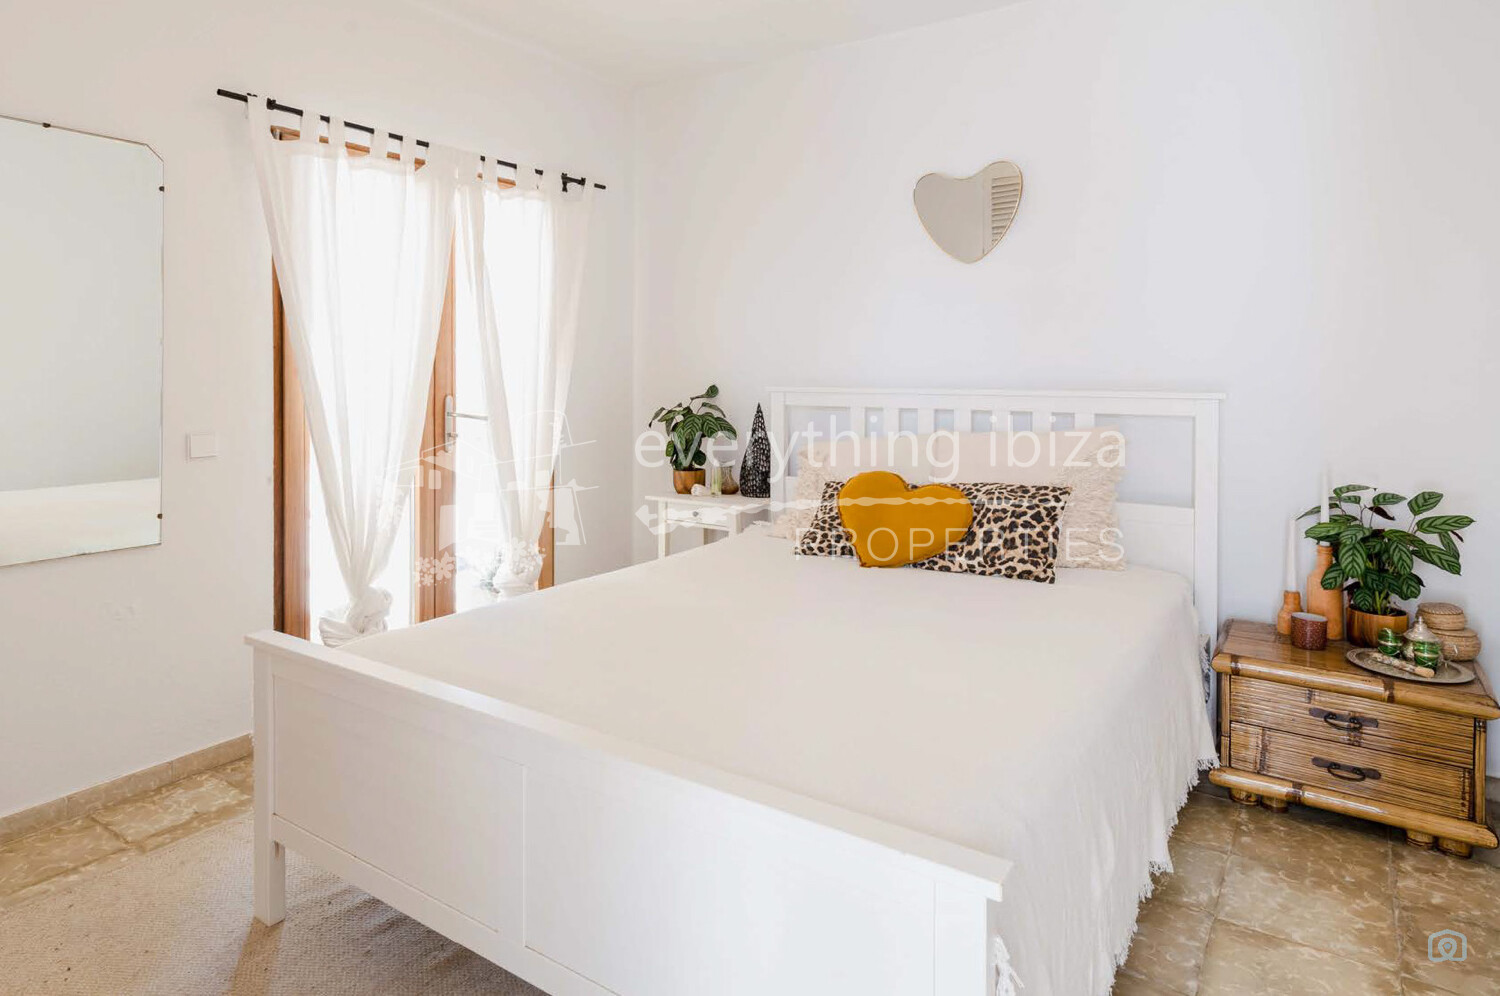 Charming Cosy Villa Recently Renovated in a Peaceful Location, ref. 1630, for sale in Ibiza by everything ibiza Properties